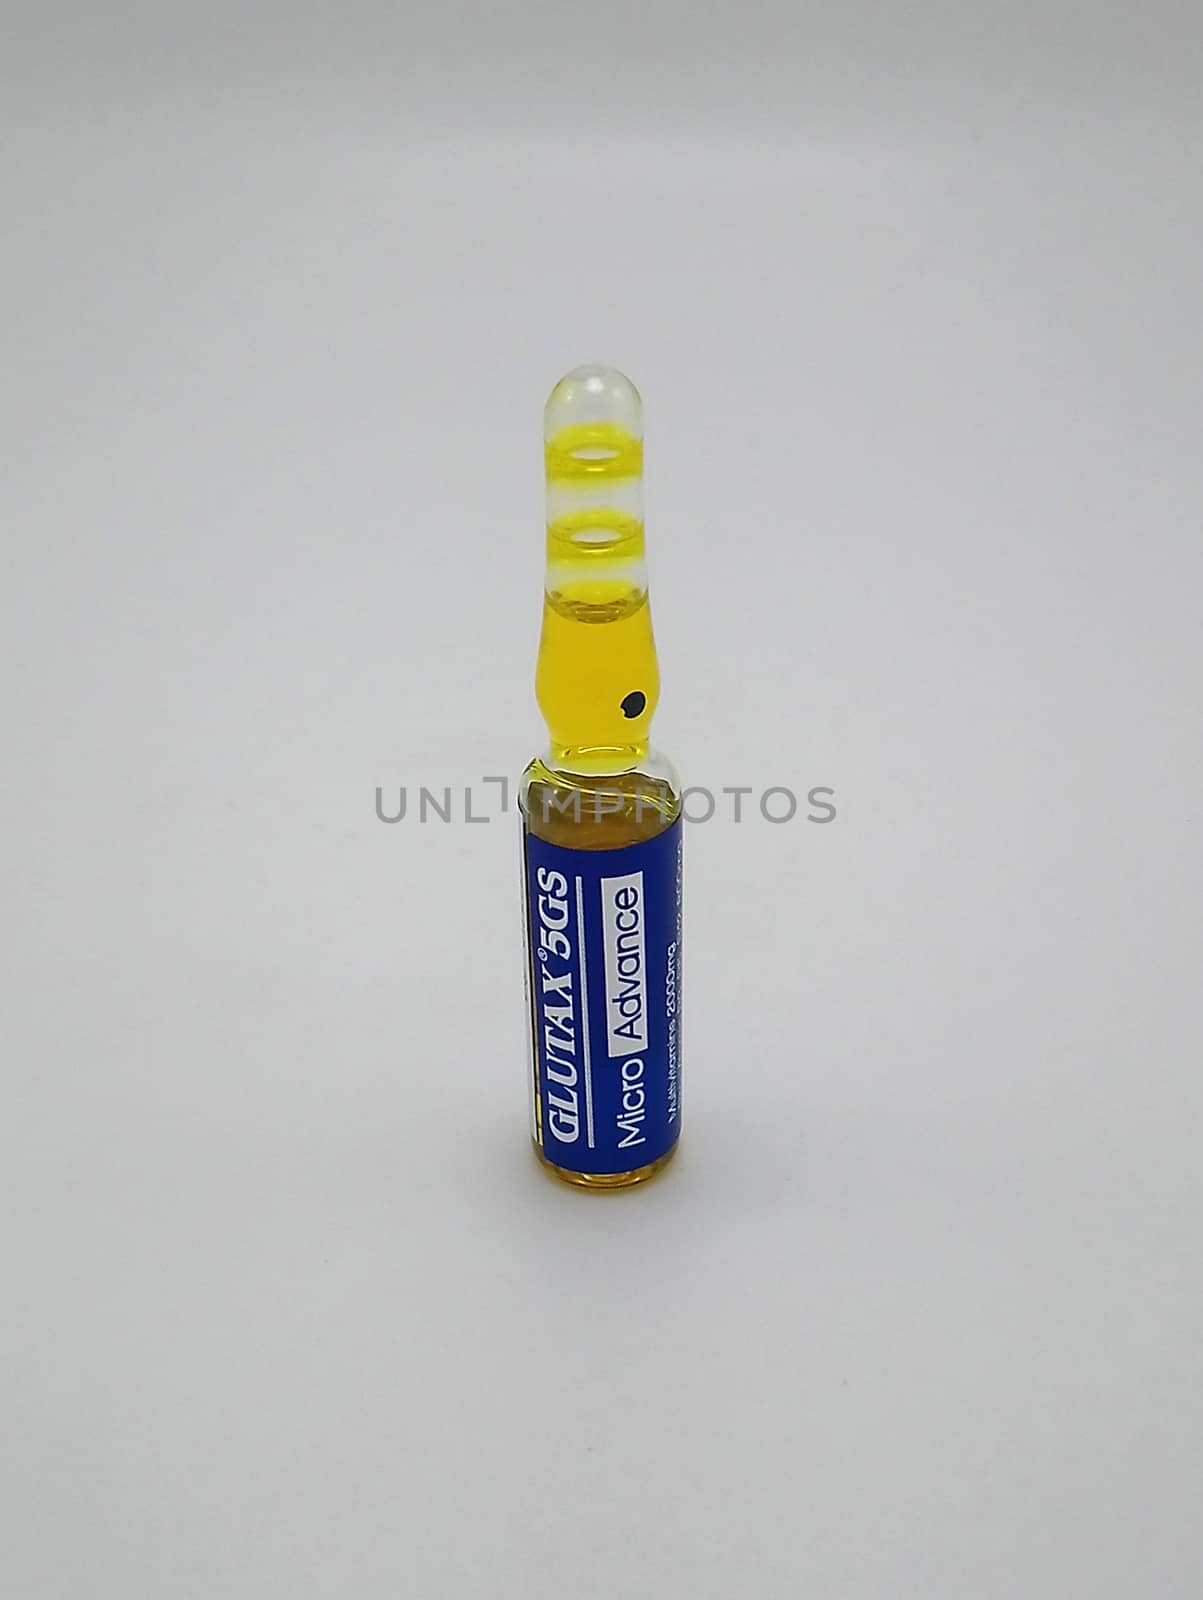 Glutax 5gs micro advance vial in Manila, Philippines by imwaltersy